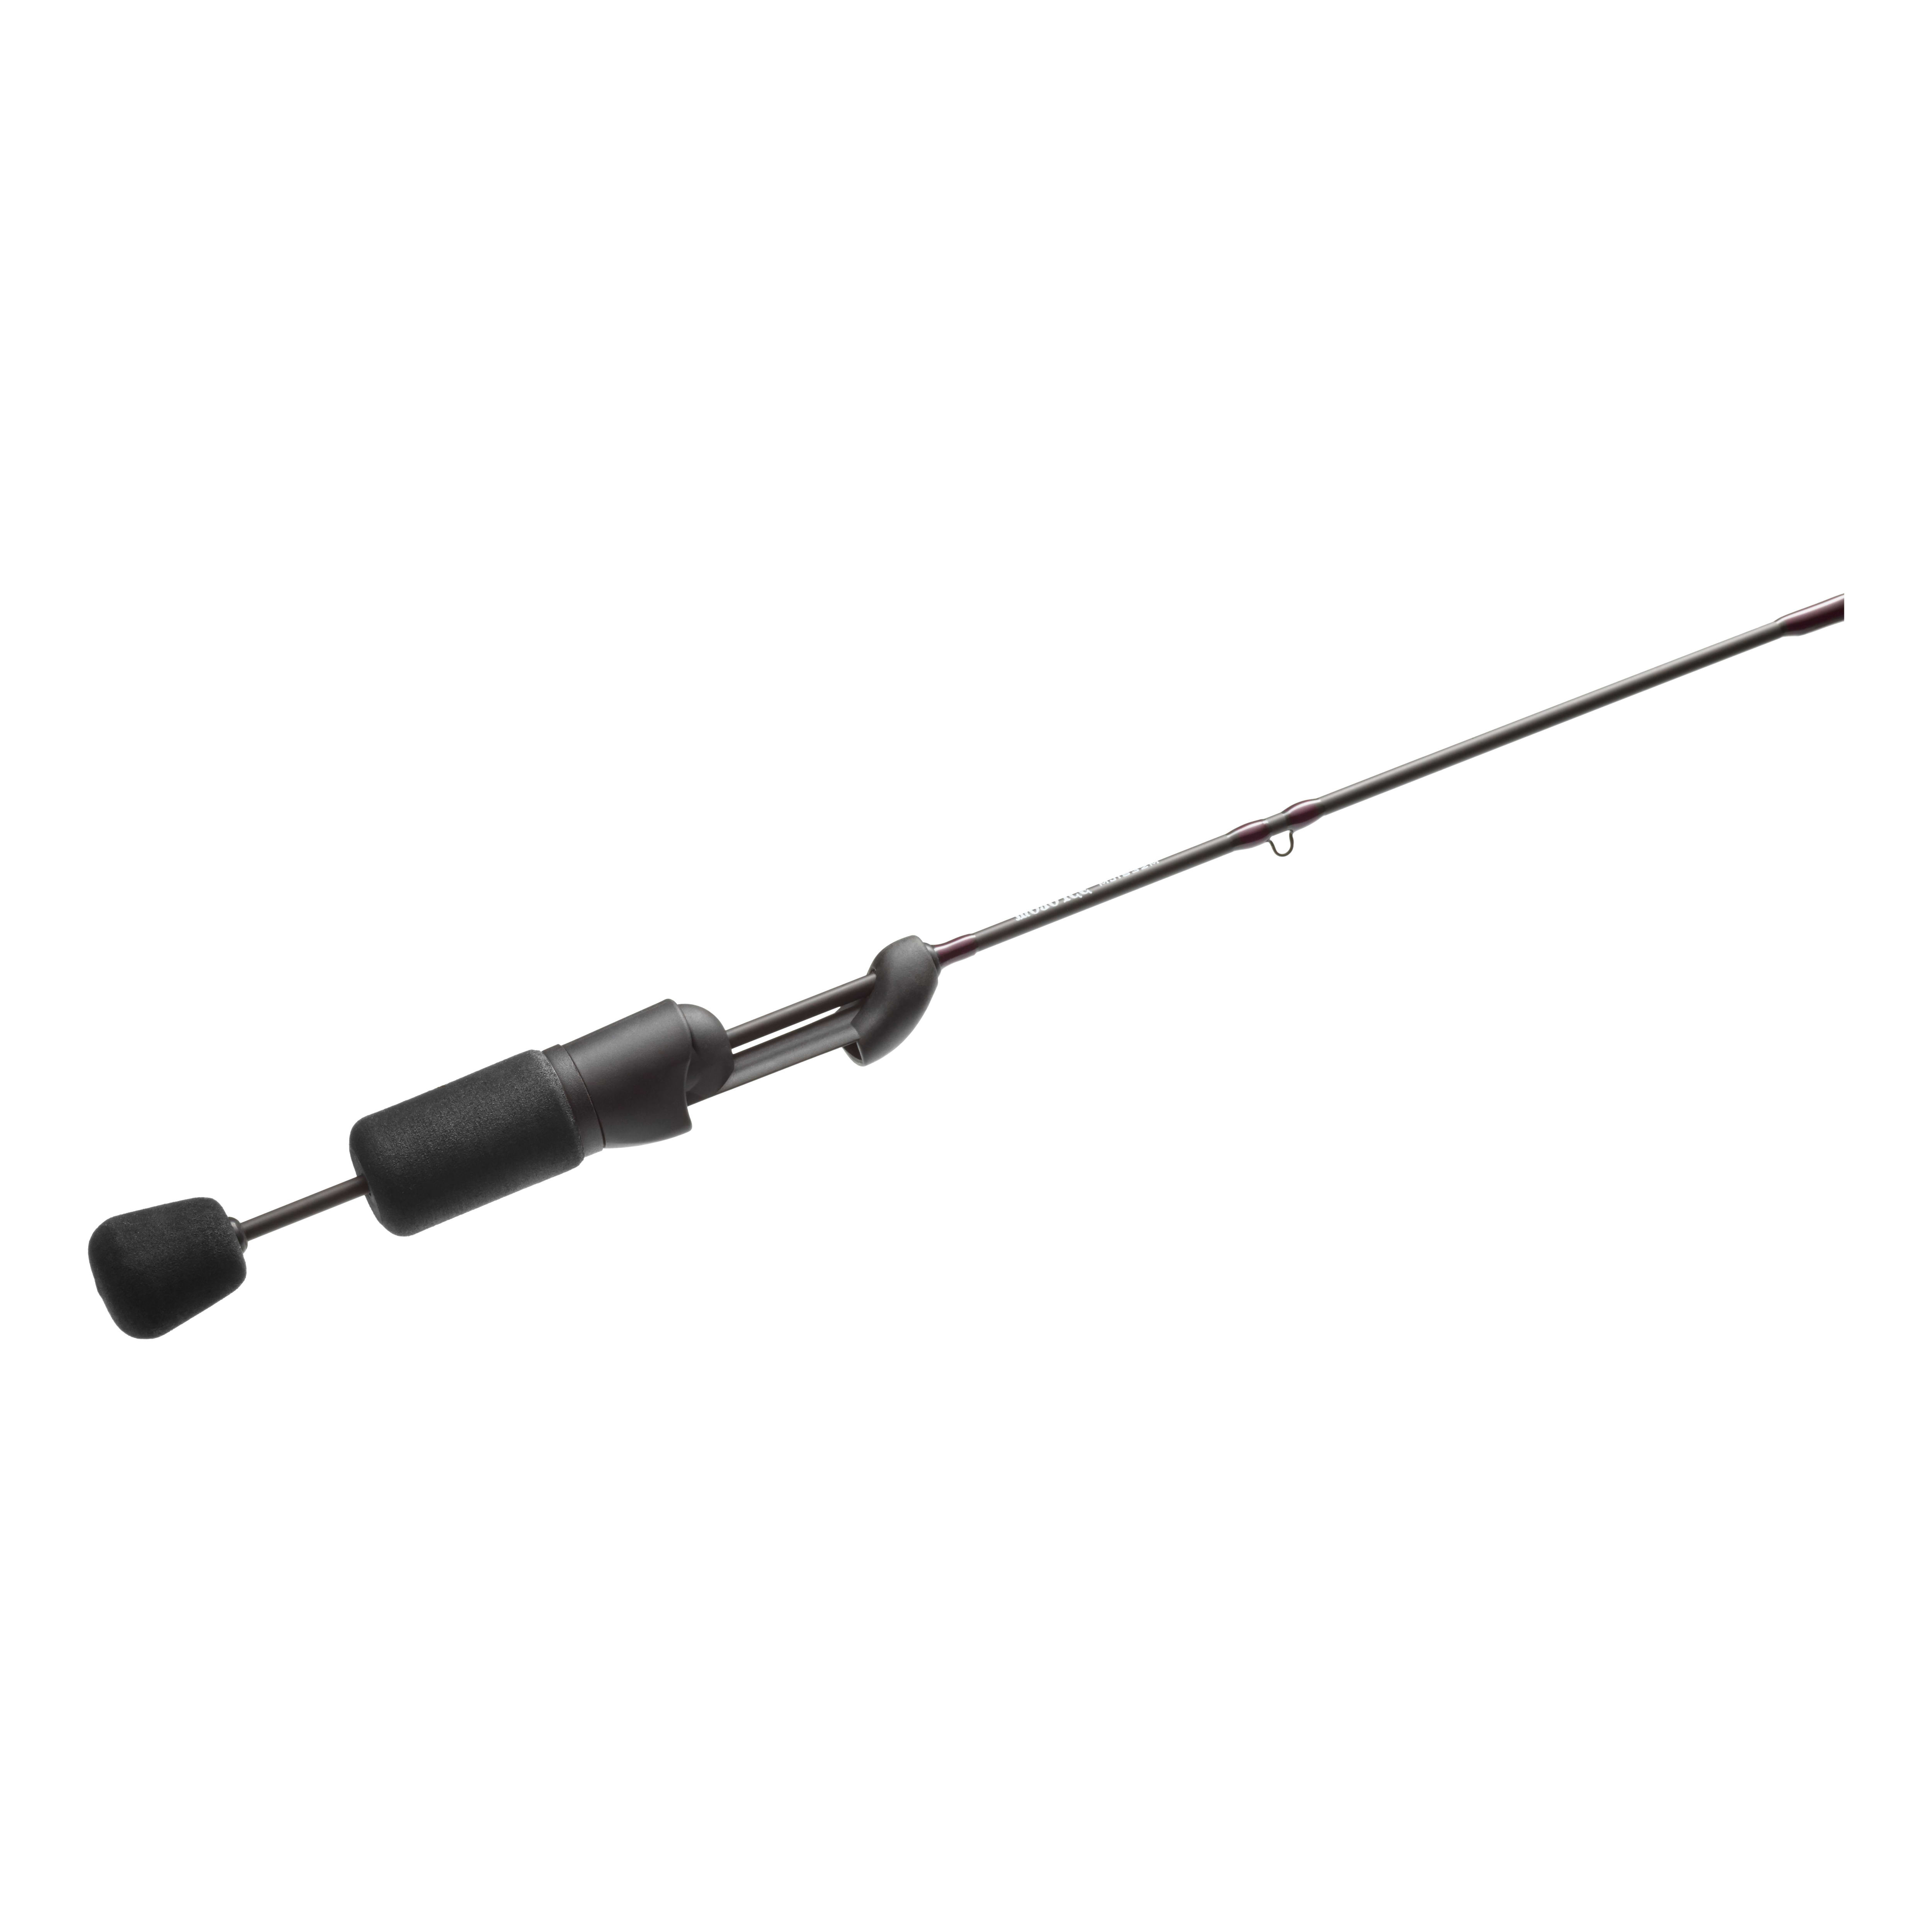 St. Croix® Mojo Ice Spinning Rods